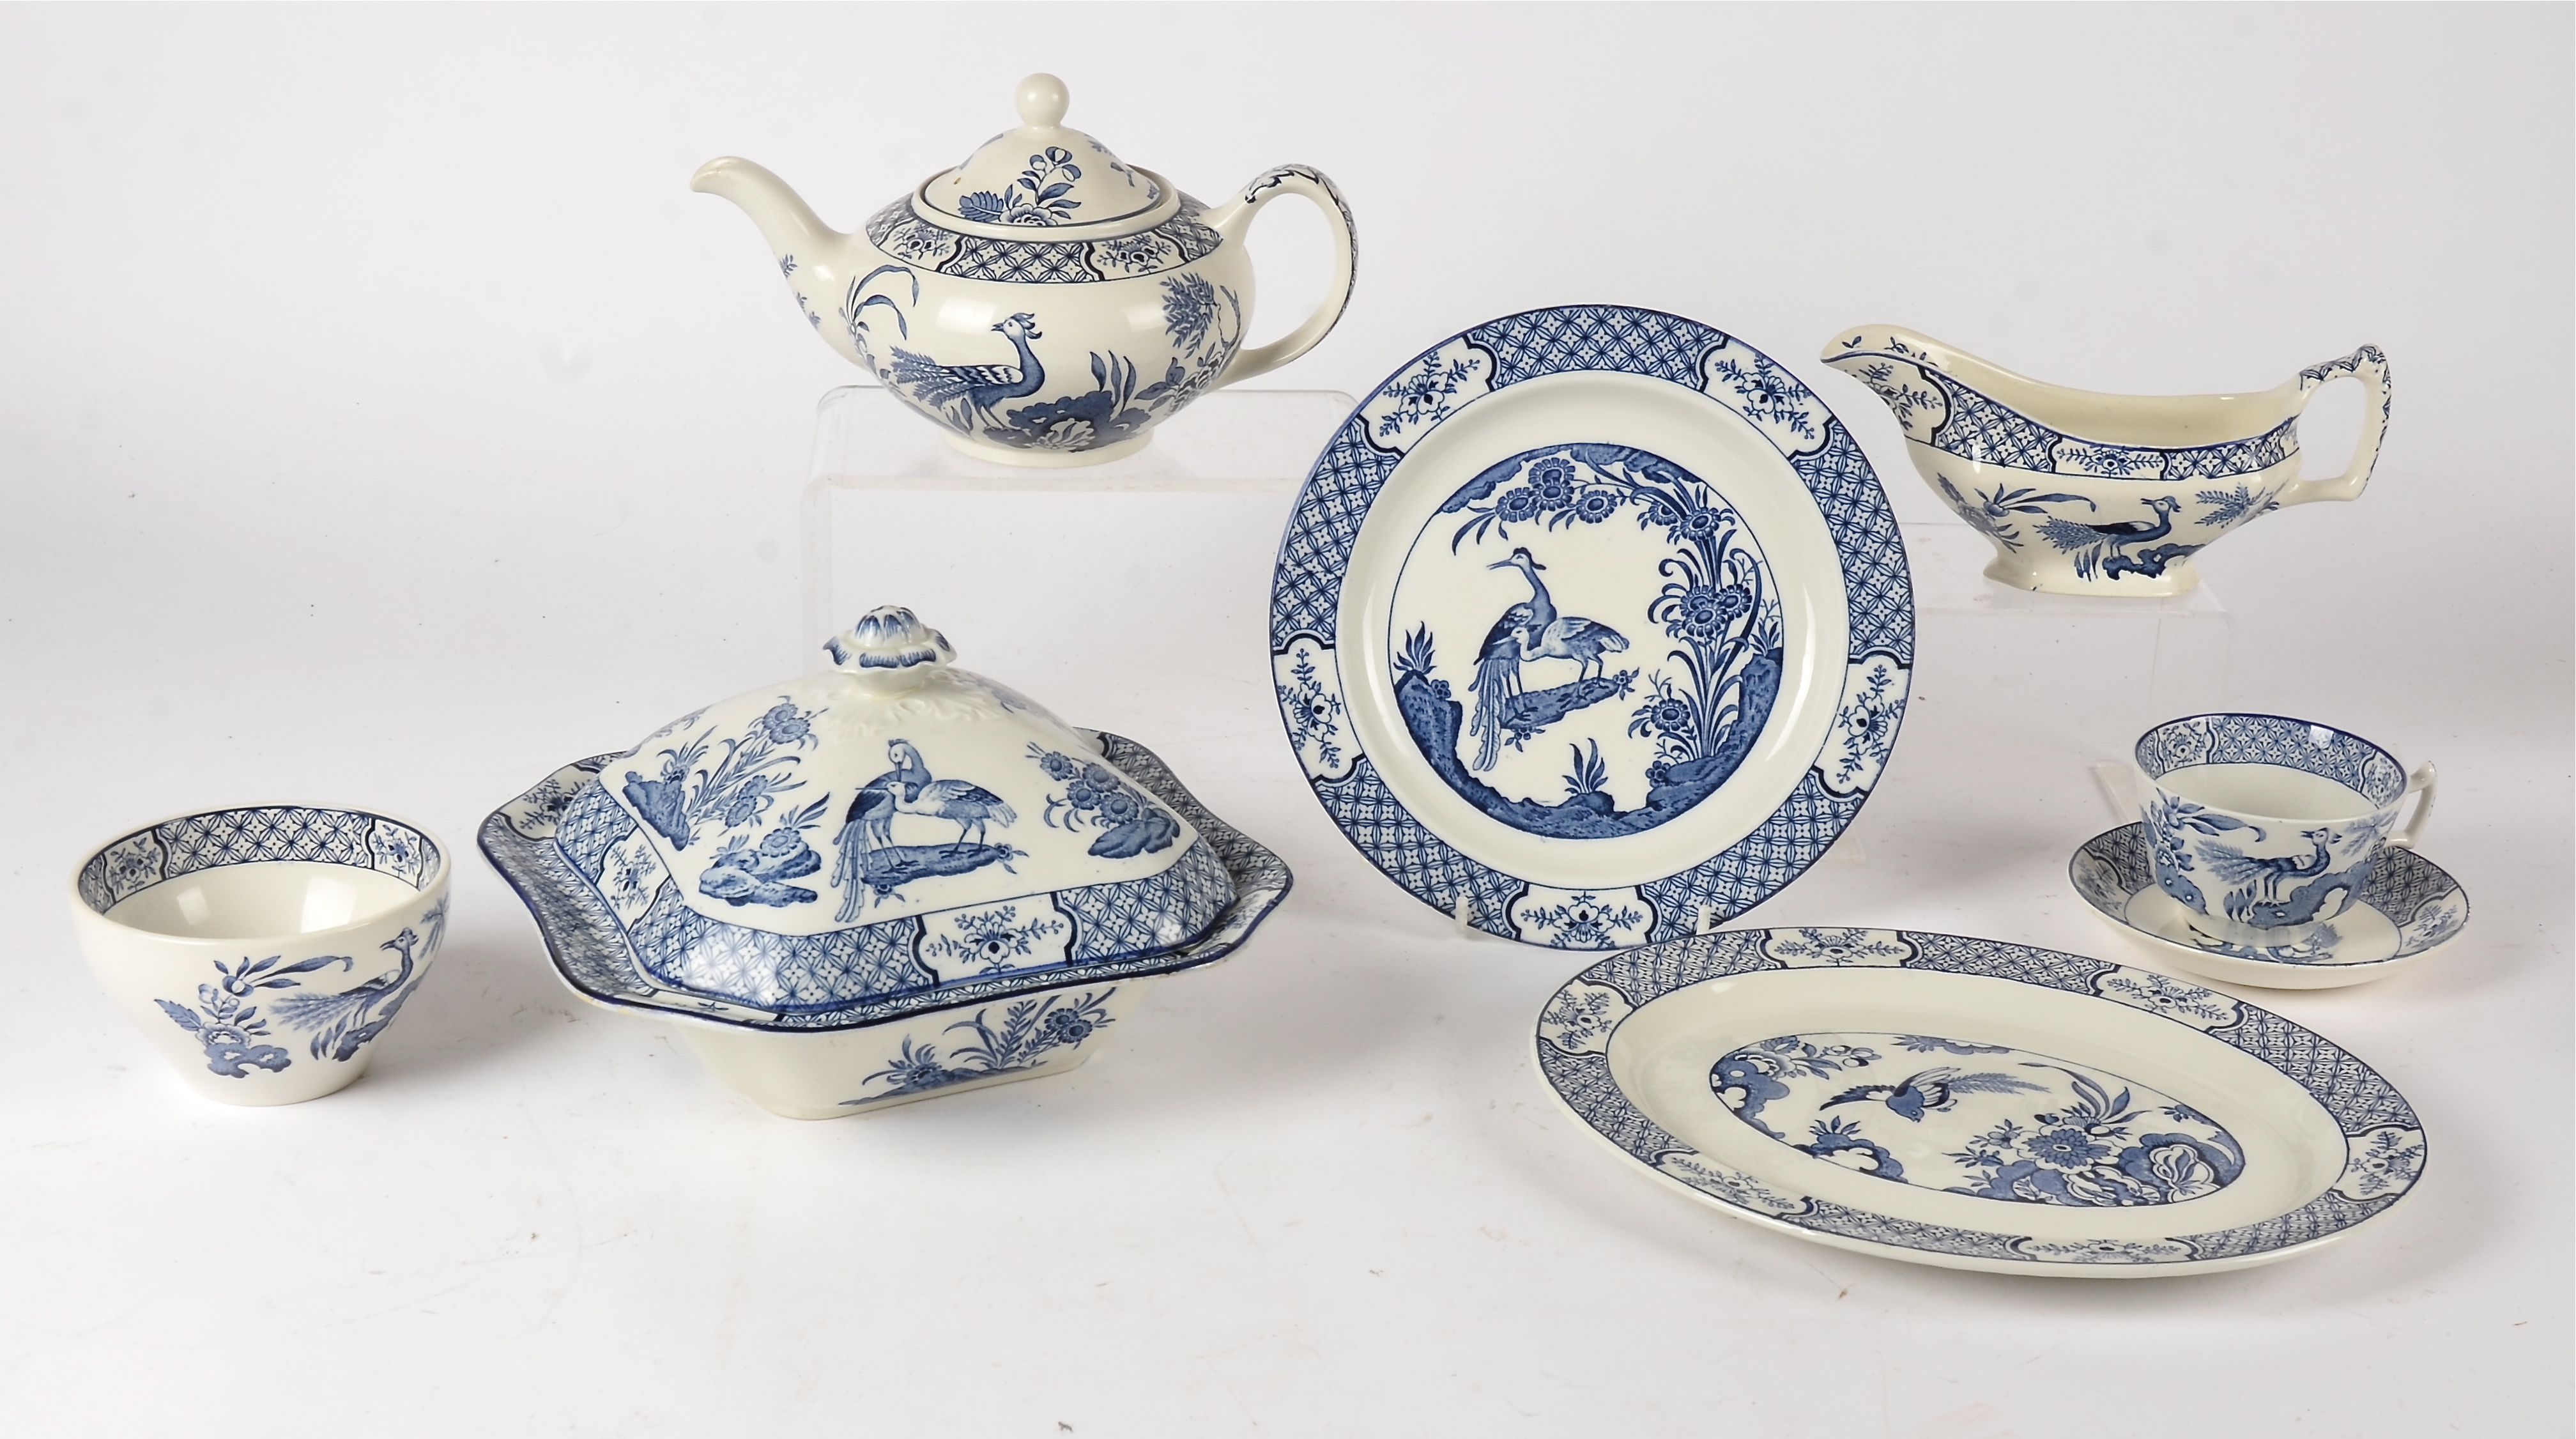 An extensive blue and white Woods and Sons dinner service, in the 'Yuan' pattern with exotic birds